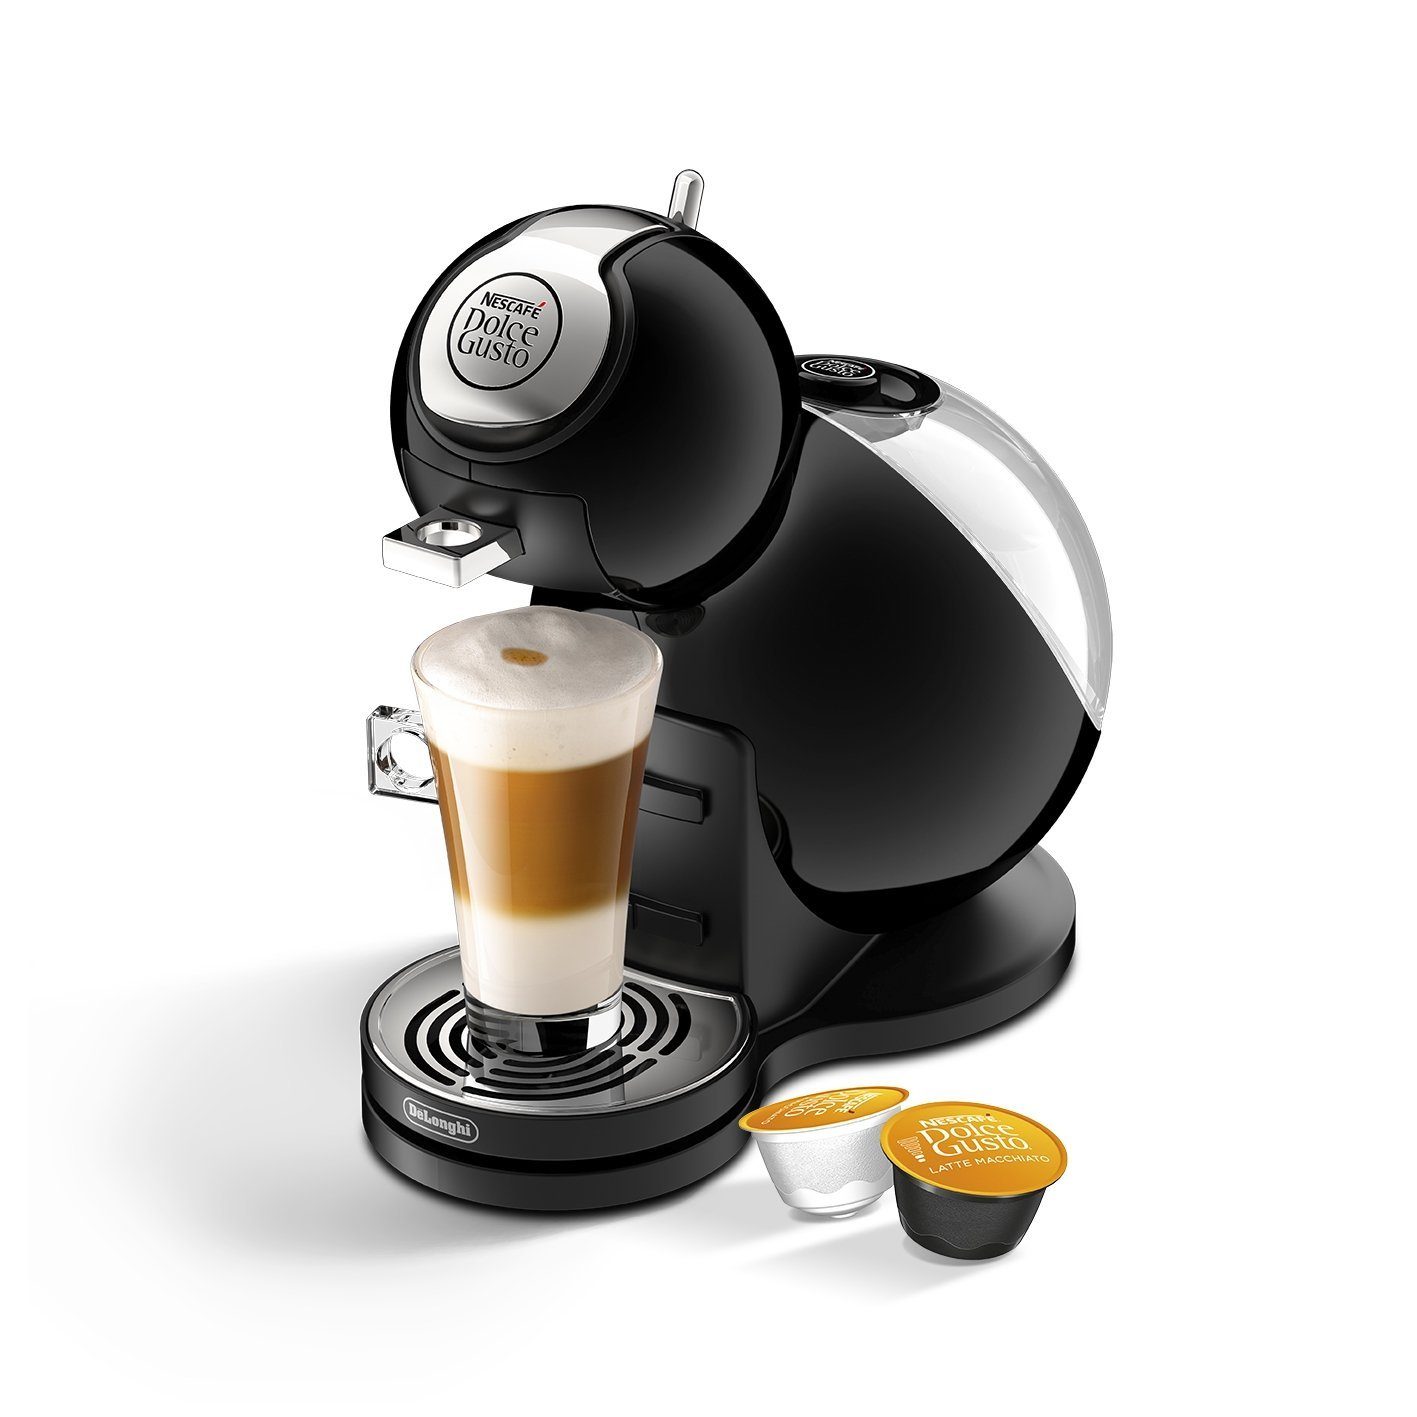 Nescafé Dolce Gusto Melody 3 UK Review |The Perfect Grind